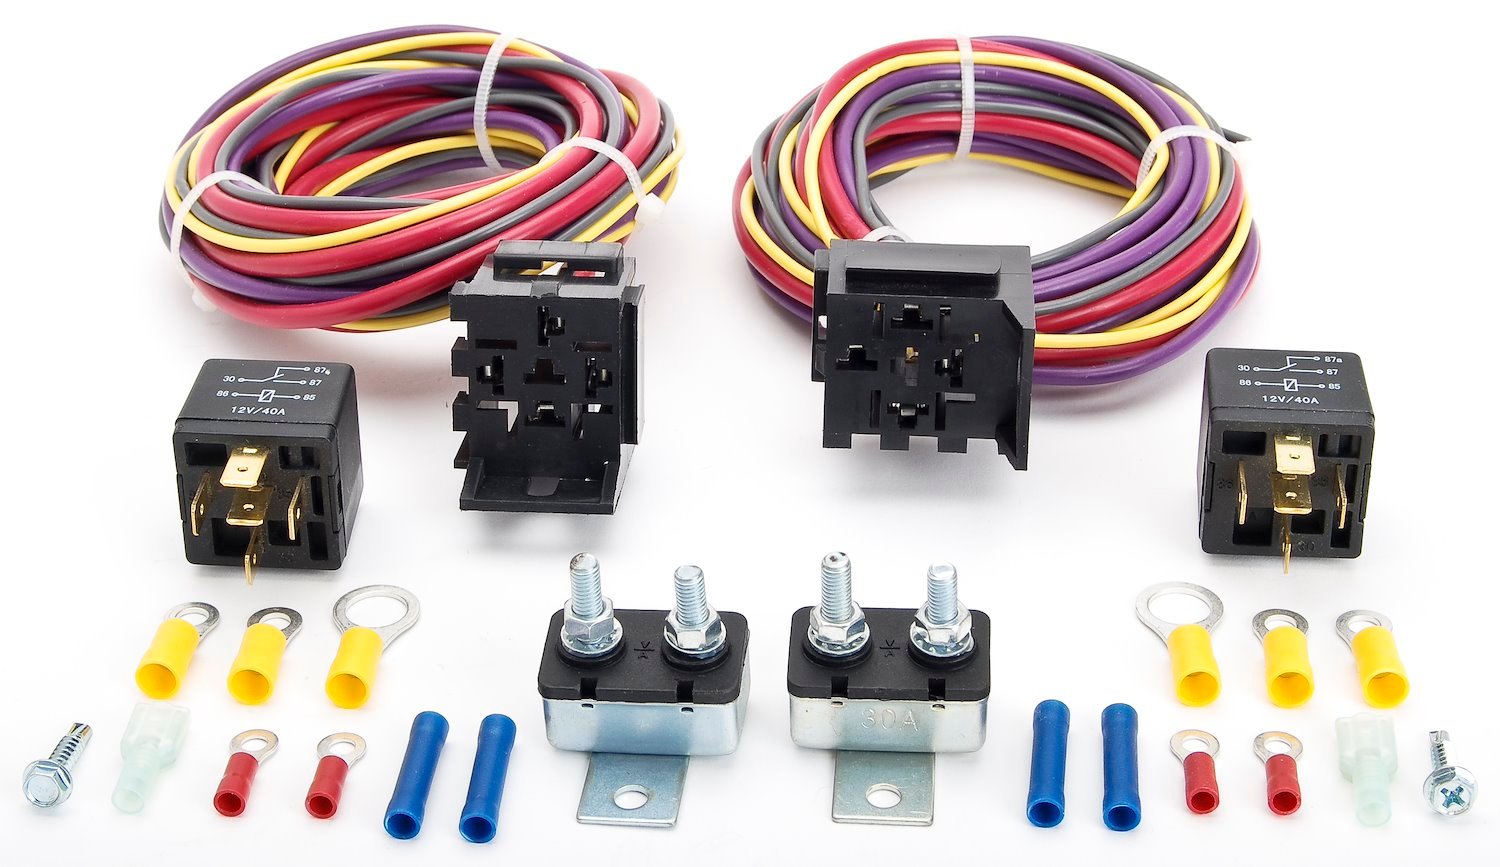 Manual-Controlled Dual Fan Wiring Harness and Relay Kit 30 Amp